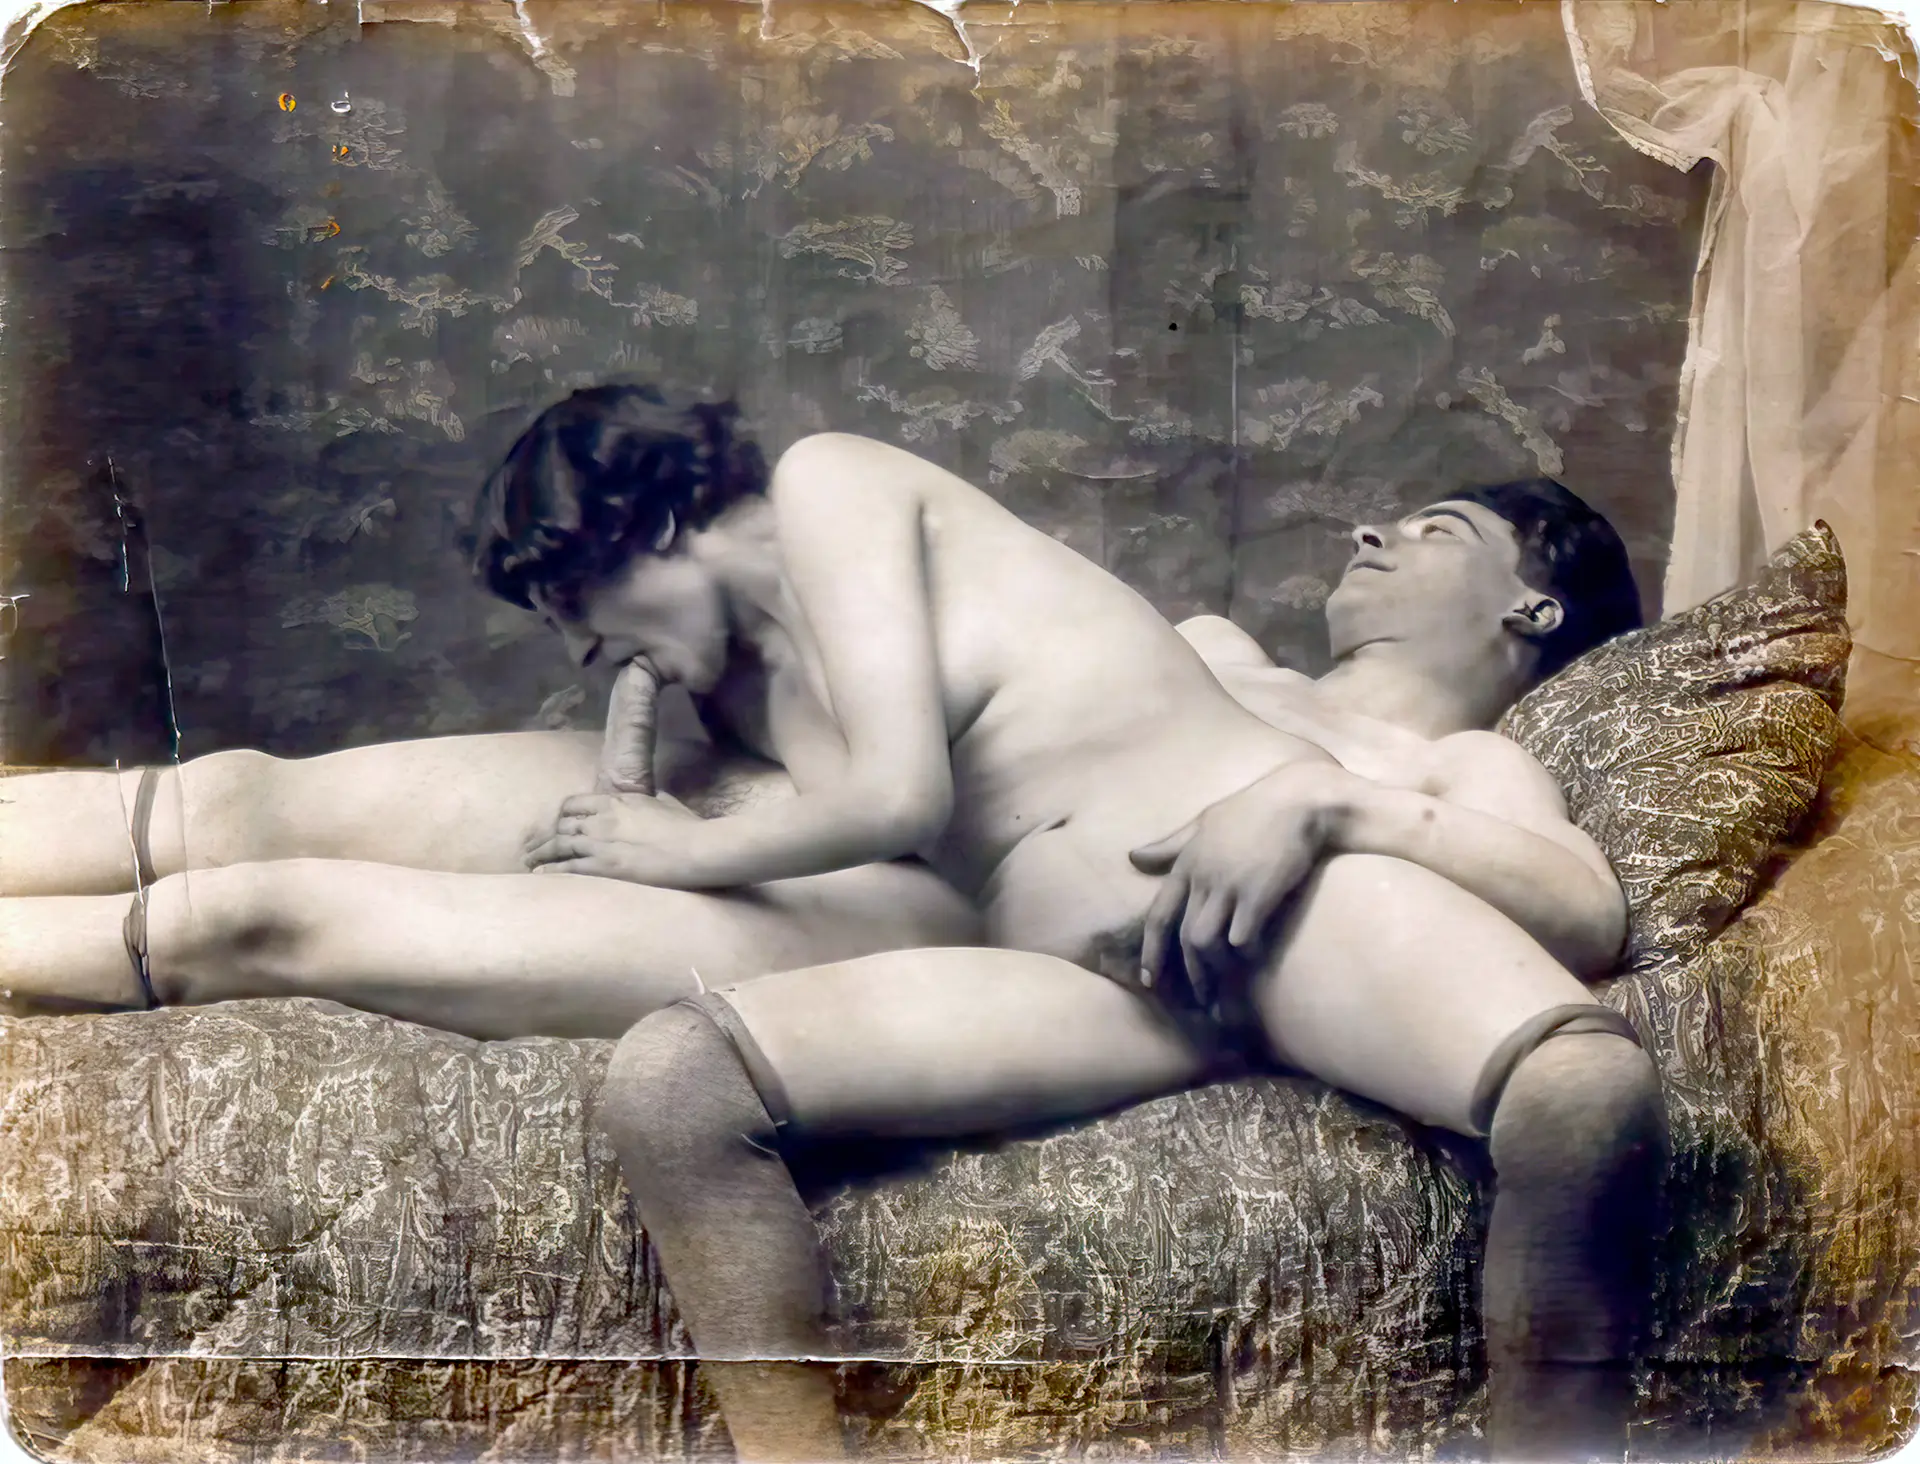 Antique man with a hard-on enjoys an oral satisfaction from his lady Slut porn